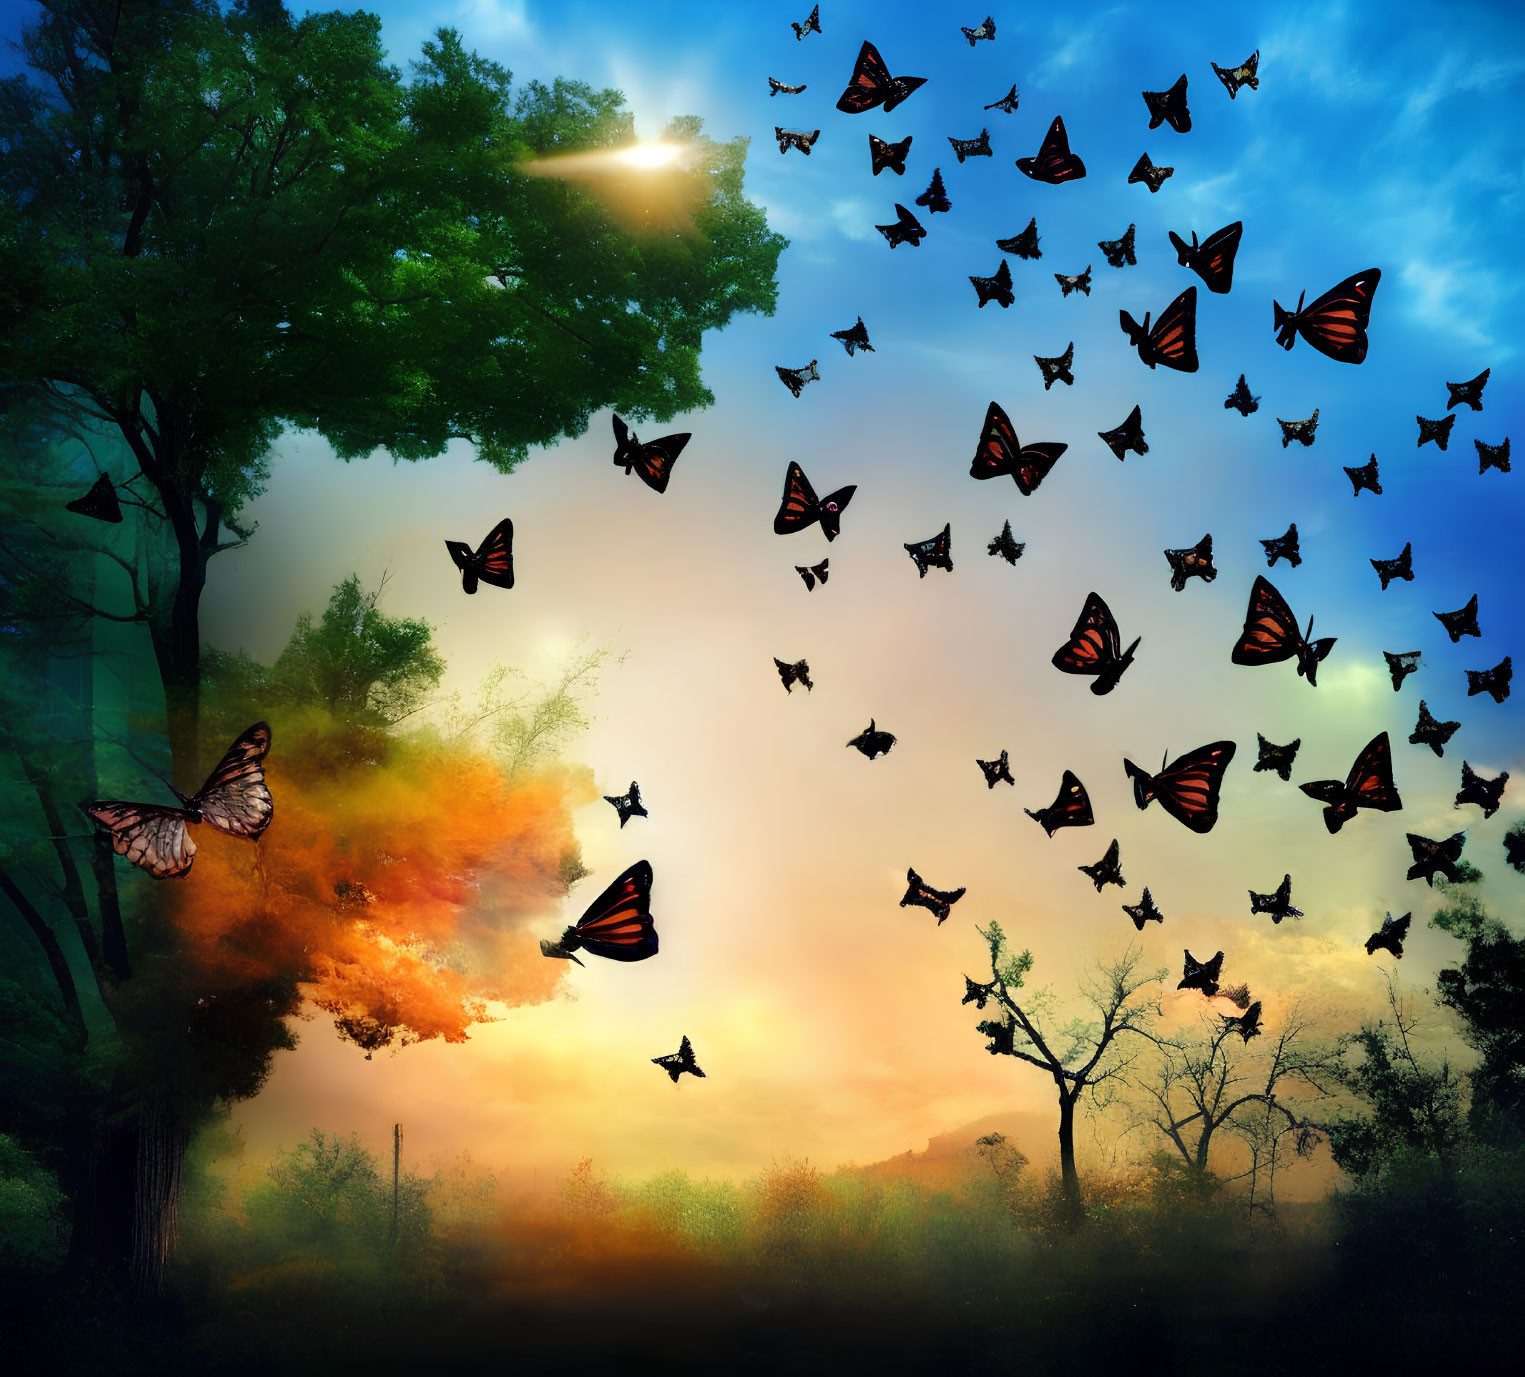 Vibrant sunset forest with swarm of butterflies